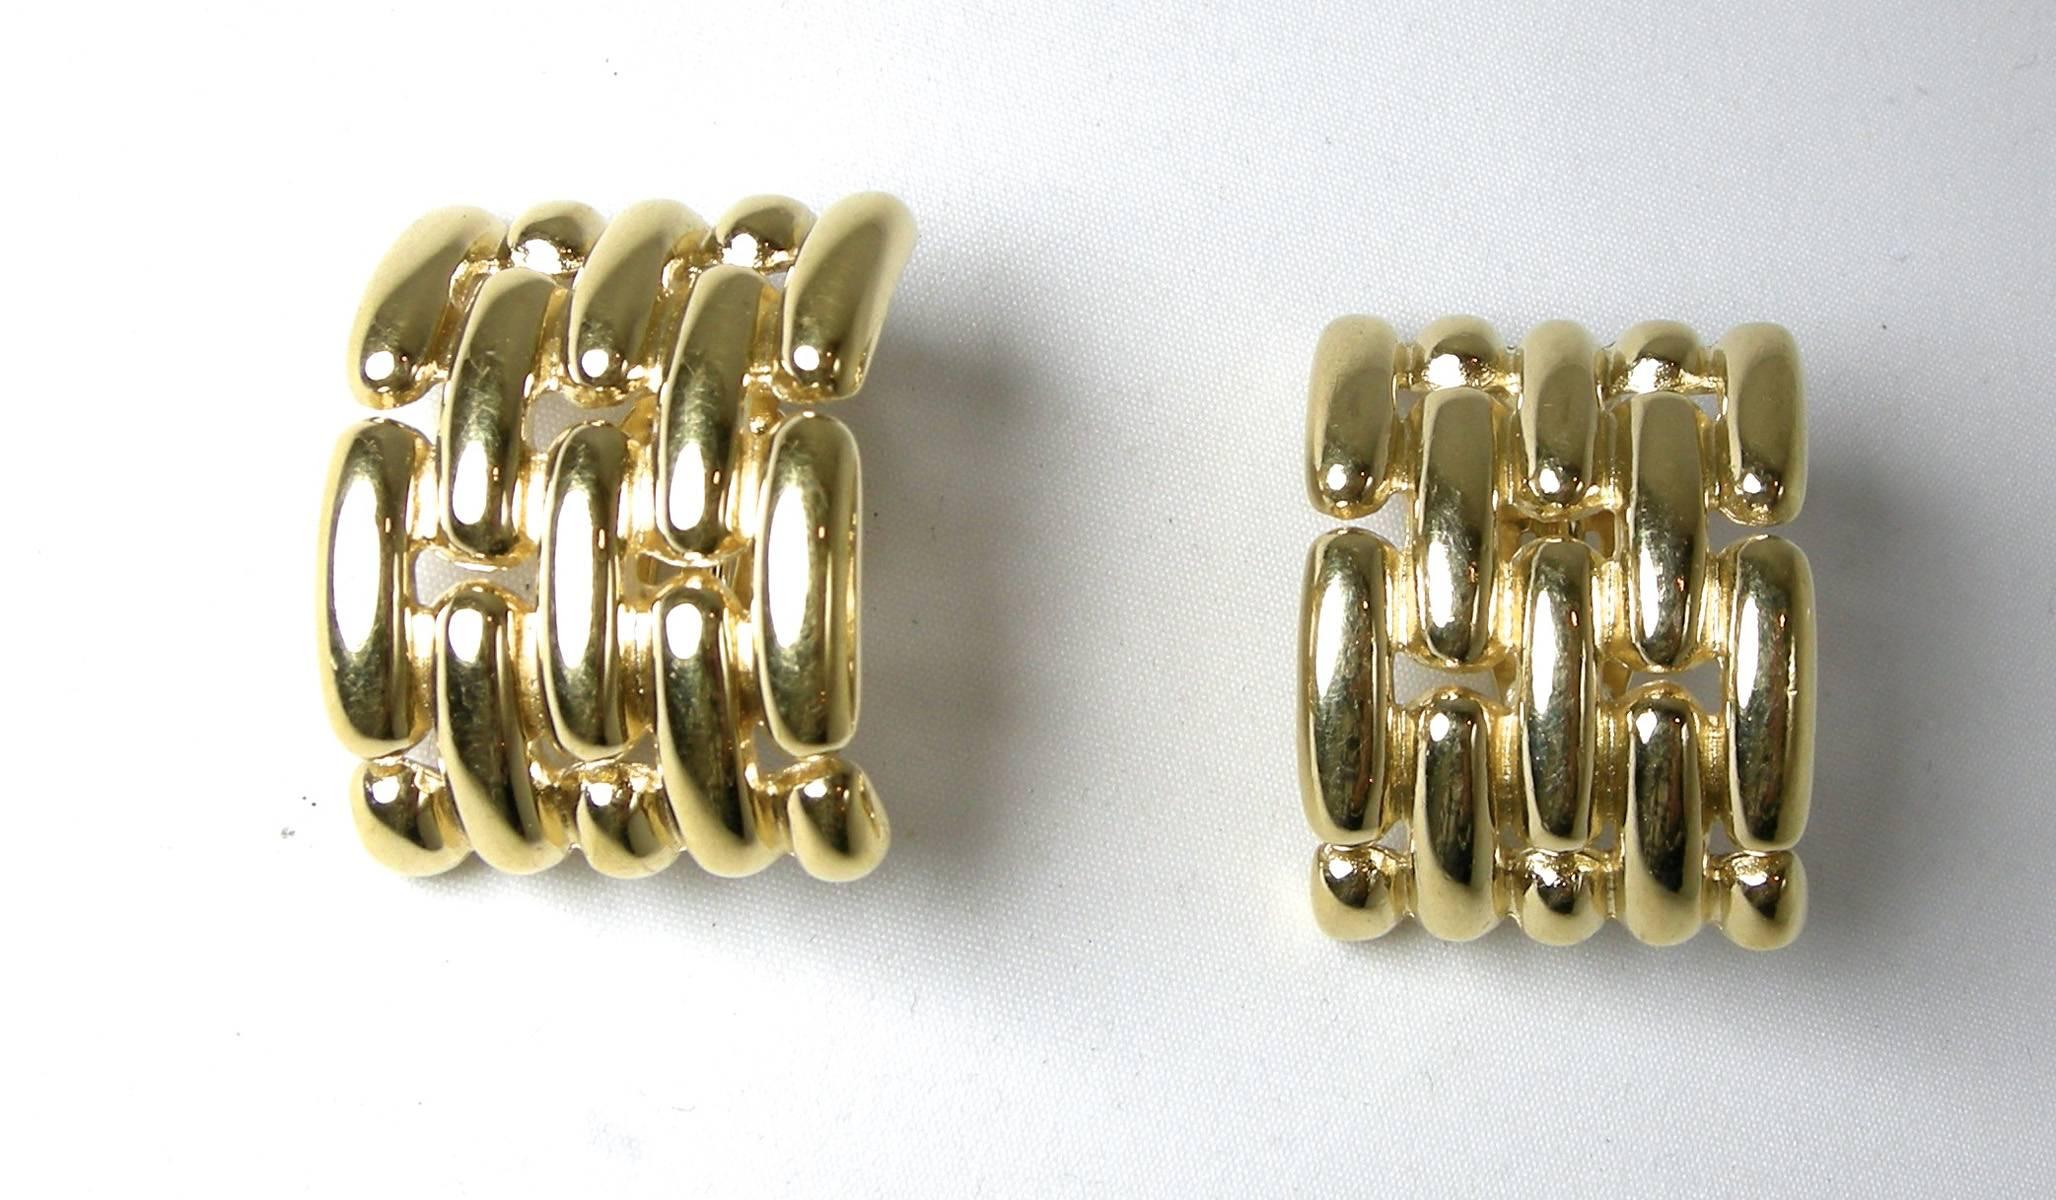 These beautiful 1990s Givenchy clip-back earrings have a ribbed design in a gold-tone setting.  They measure 2-1/4” x 7/8” and signed “Givenchy Paris New York”.  They are in excellent condition.